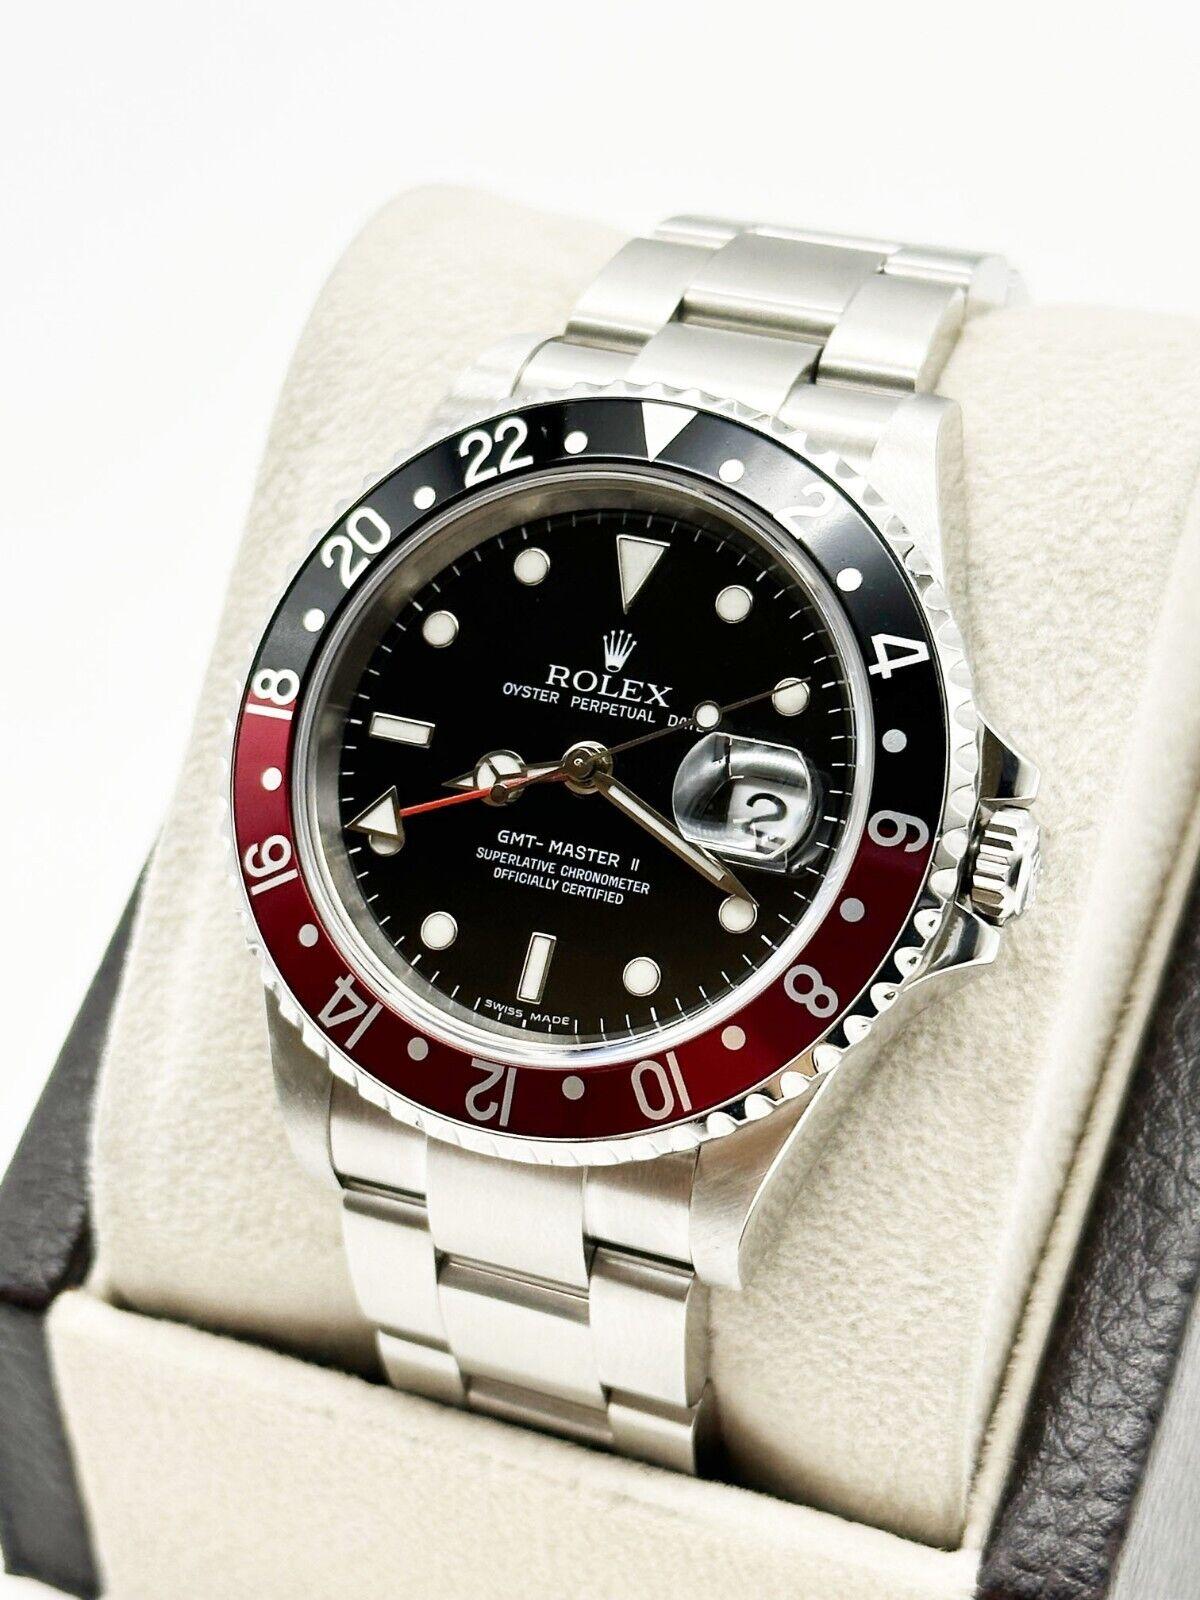 Style Number: 16710

Serial: D695***

Year: 2005 

Model: GMT Master II  

Case Material: Stainless Steel  

Band: Stainless Steel  

Bezel: Coke - Red and Black  

Dial: Black 

Face: Sapphire Crystal 

Case Size: 40mm 

Includes: 

-Elegant Watch